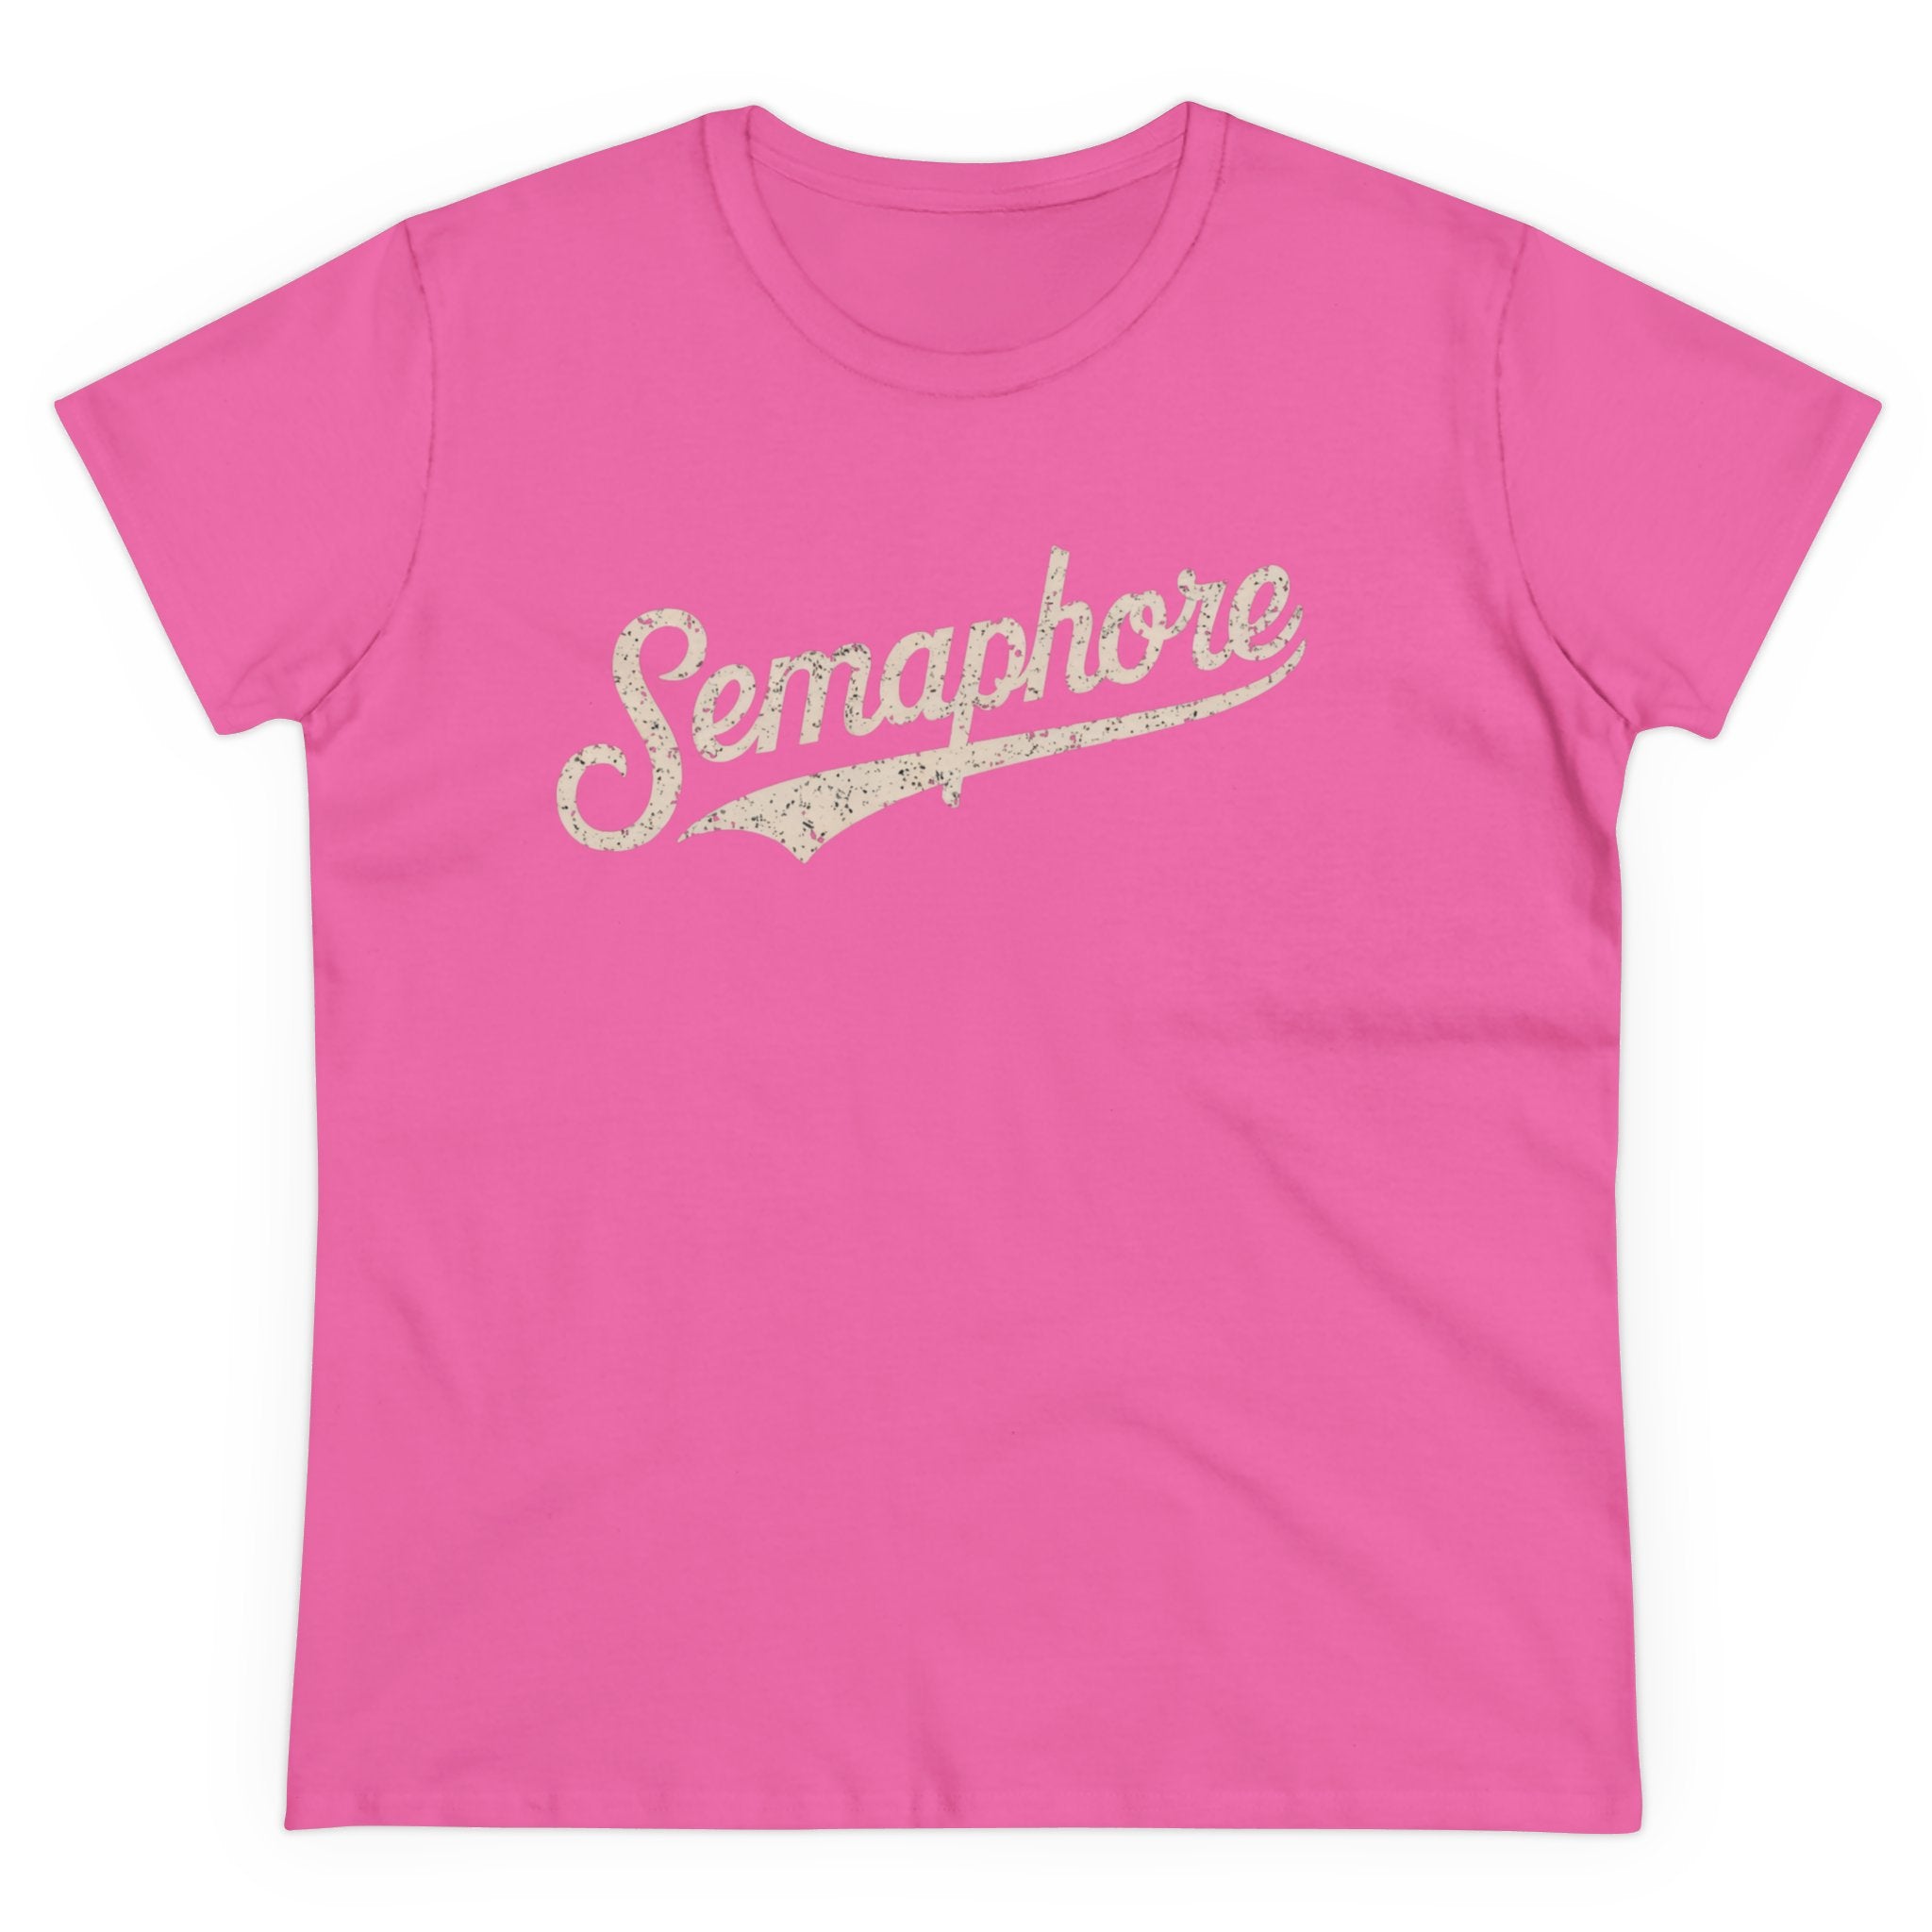 Stylish pink Semaphore - Women's Tee with the word "Semaphore" printed in white cursive text across the chest, offering both comfort and flair.